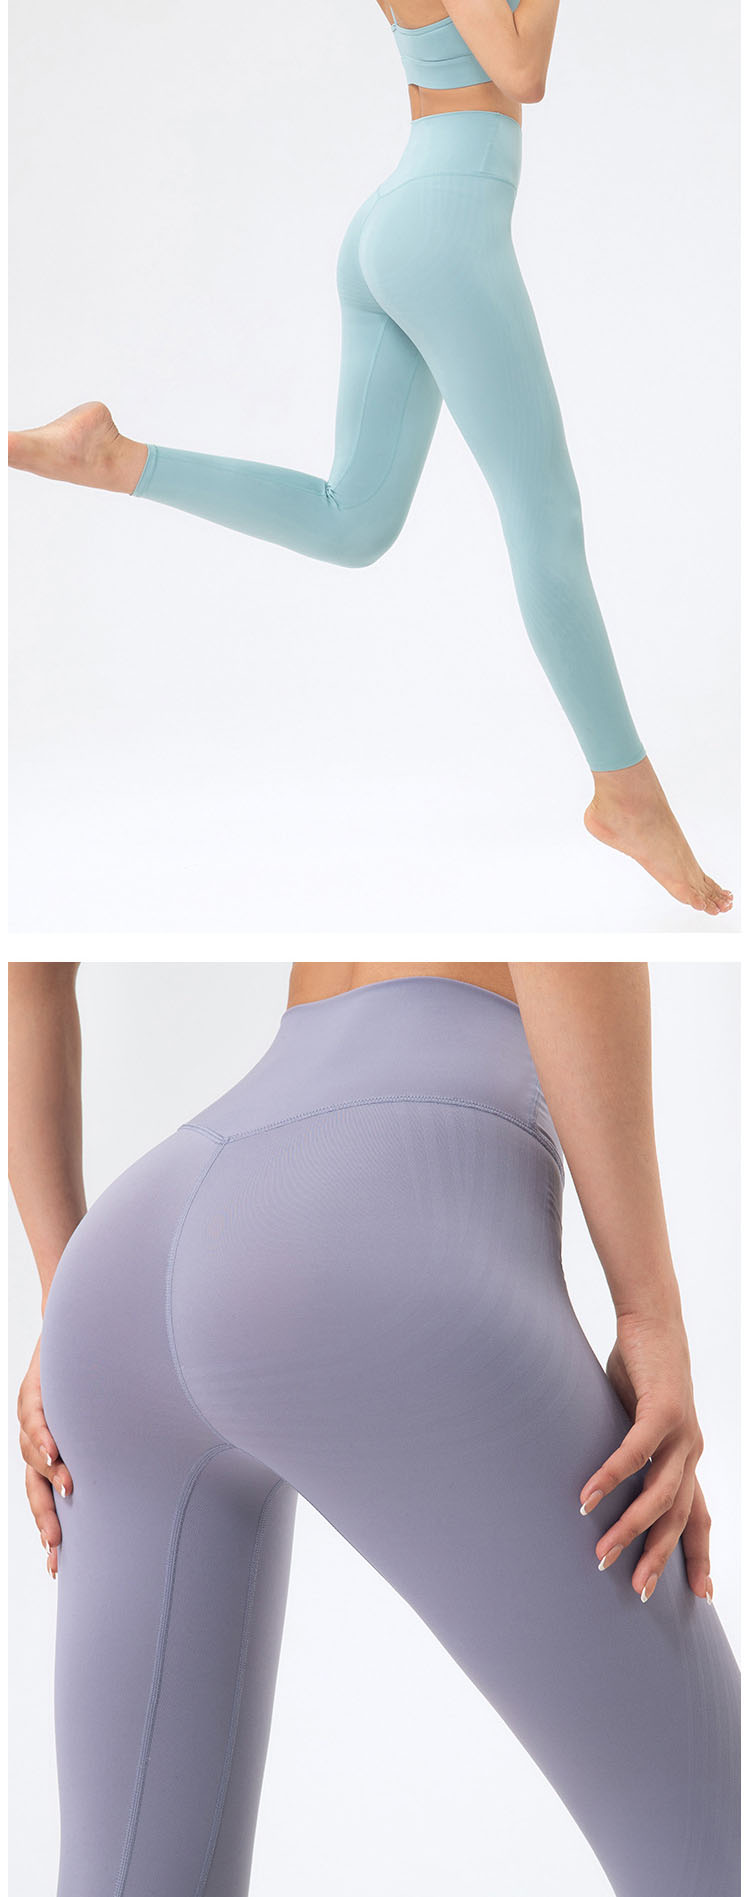 Sports fabrics are soft, comfortable and unfettered, and enjoy a smooth exercise experience.